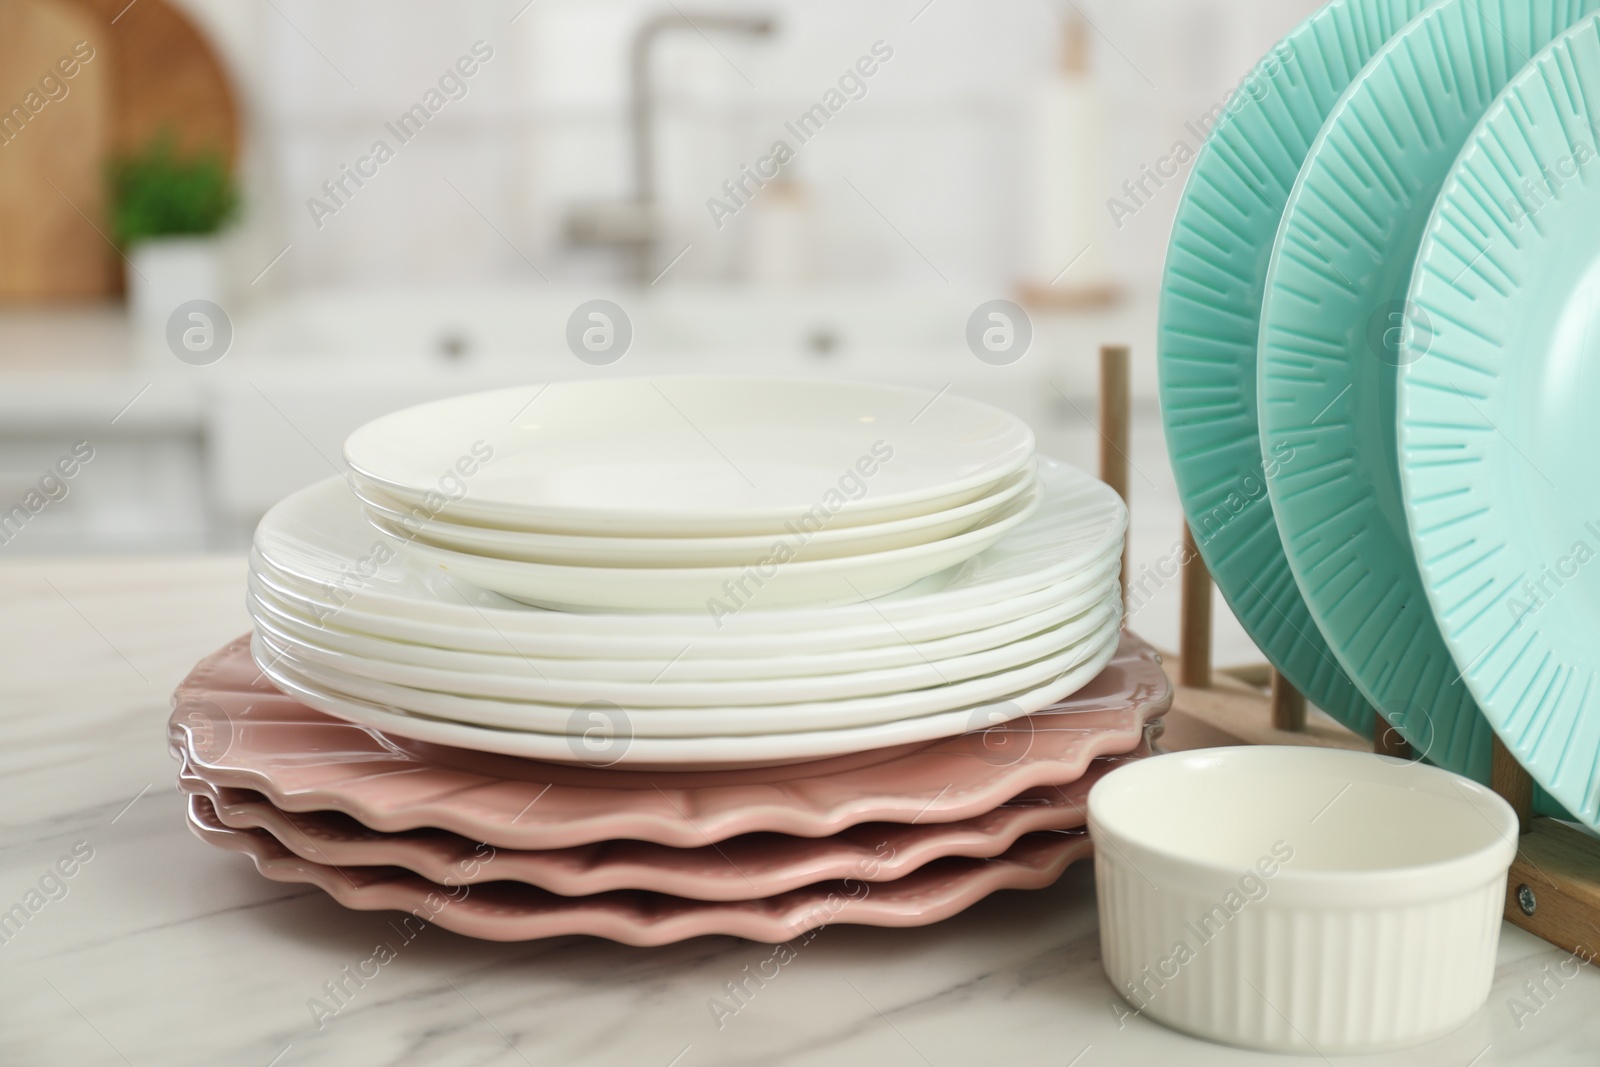 Photo of Clean plates and bowl on white marble table in kitchen